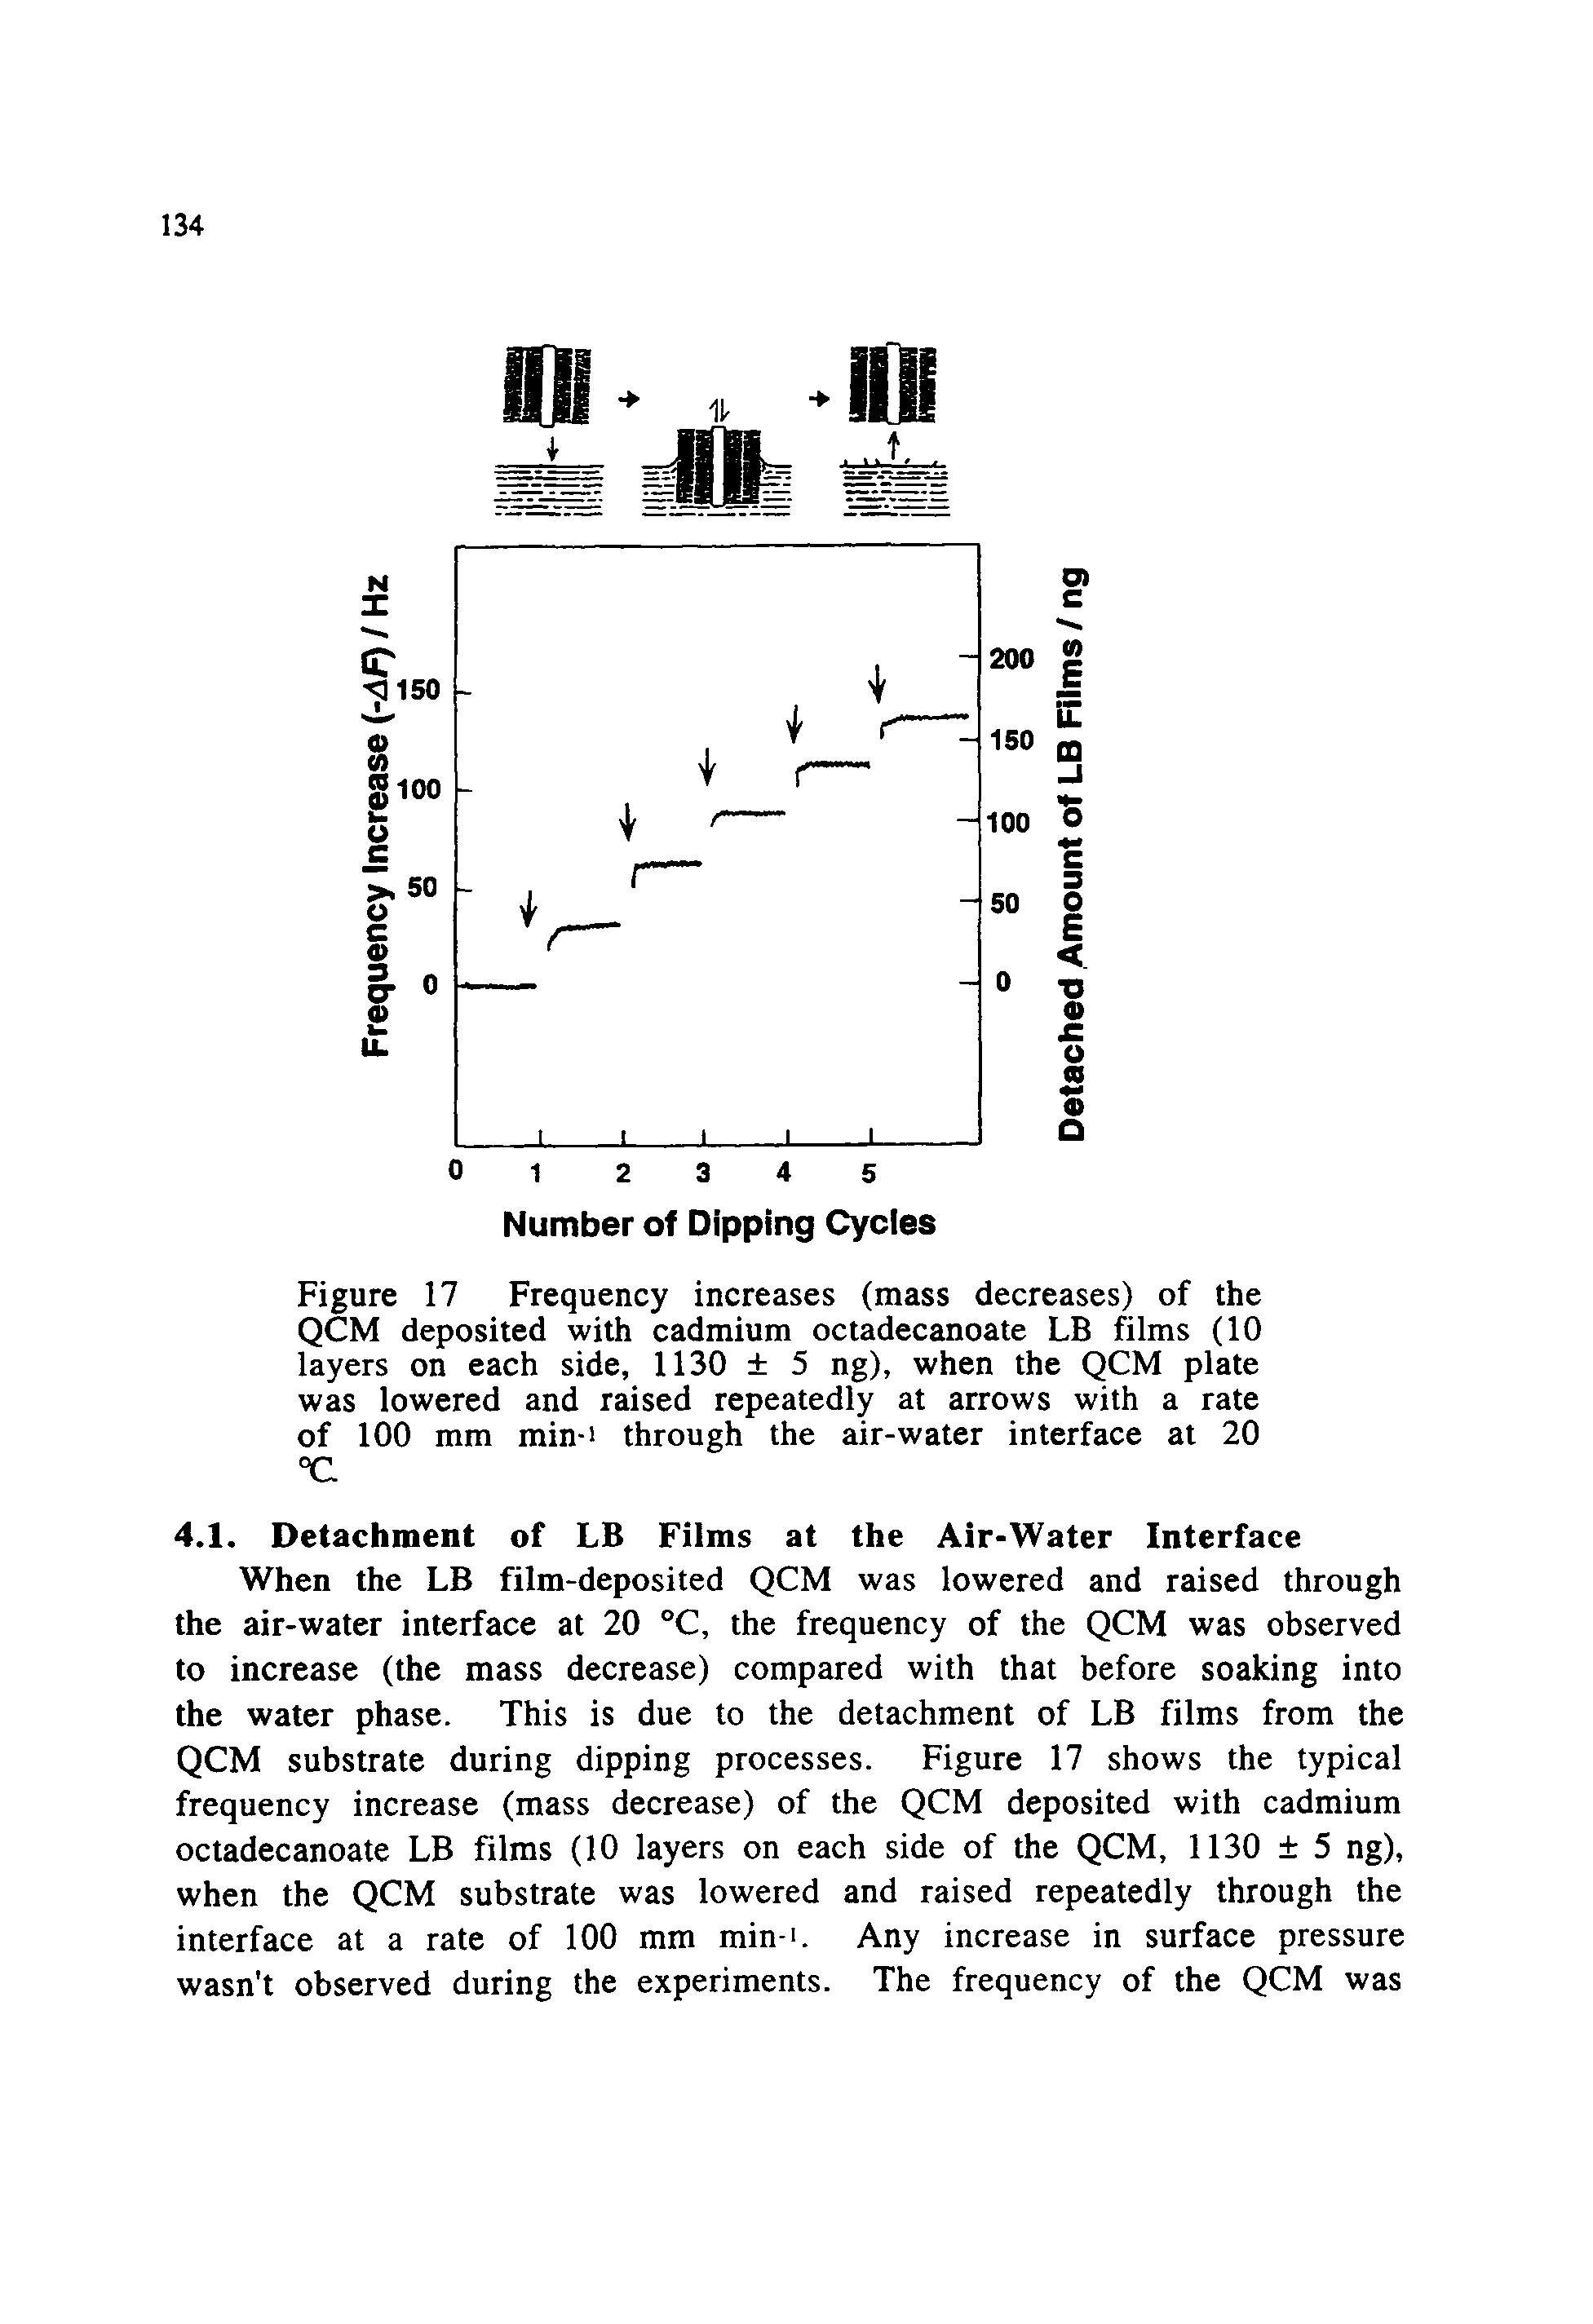 Figure 17 Frequency increases (mass decreases) of the QCM deposited with cadmium octadecanoate LB films (10 layers on each side, 1130 5 ng), when the QCM plate was lowered and raised repeatedly at arrows with a rate of 100 mm min-i through the air-water interface at 20 °C...